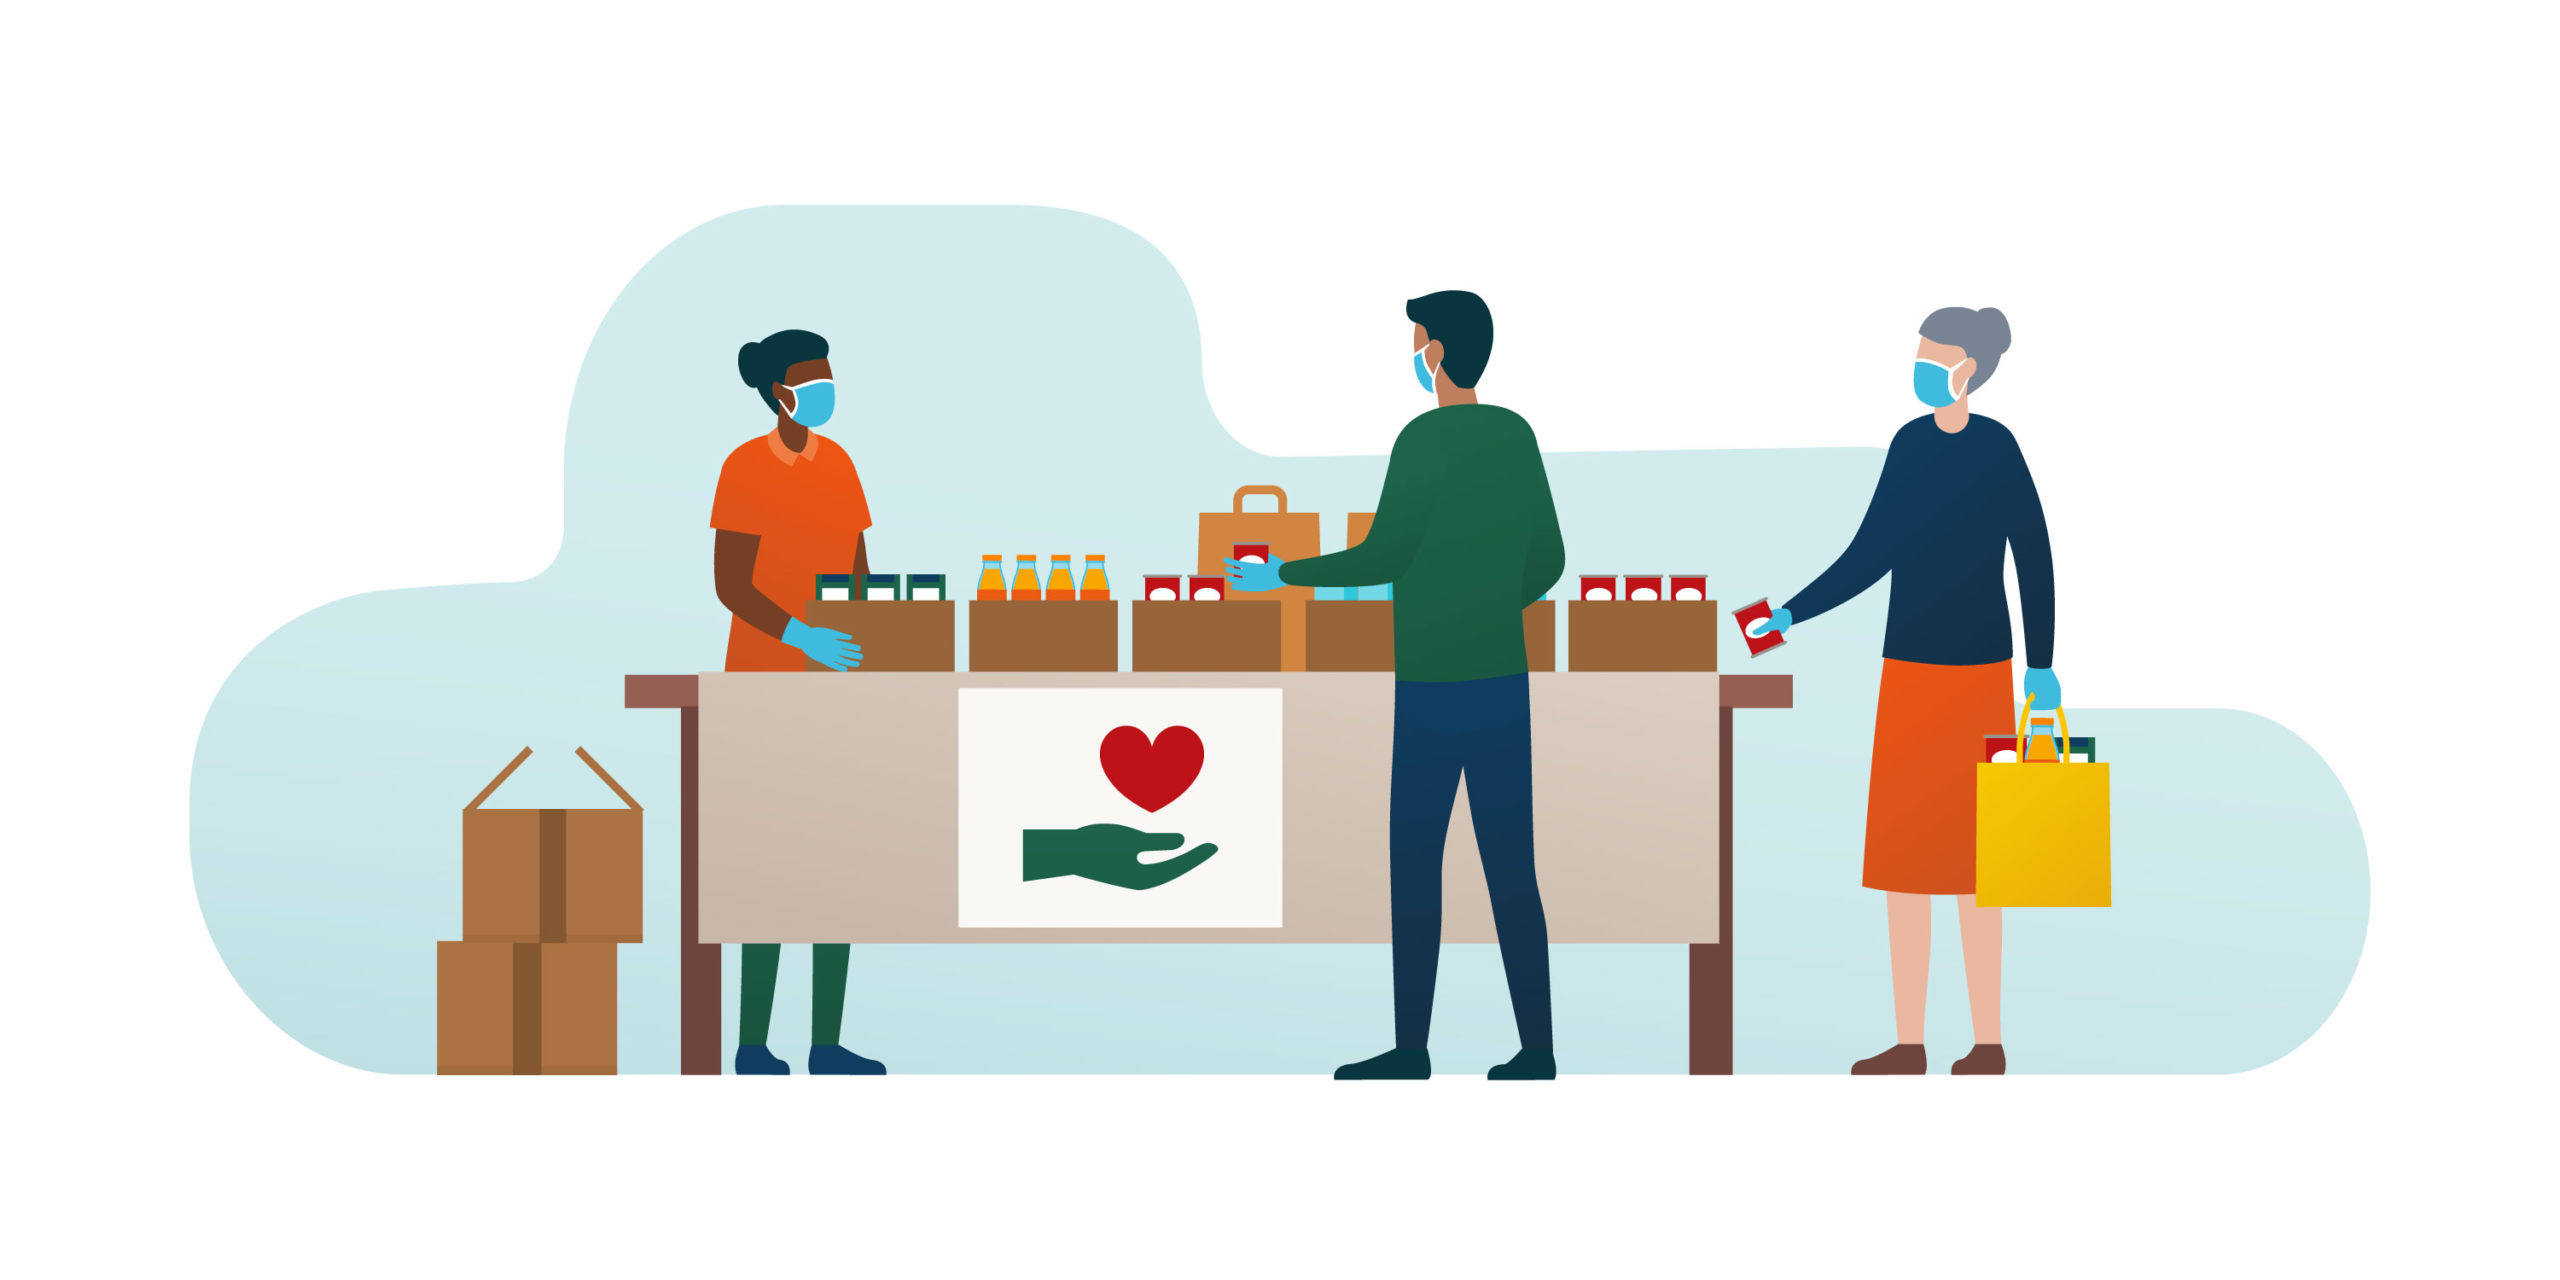 Illustration of a food bank with three people